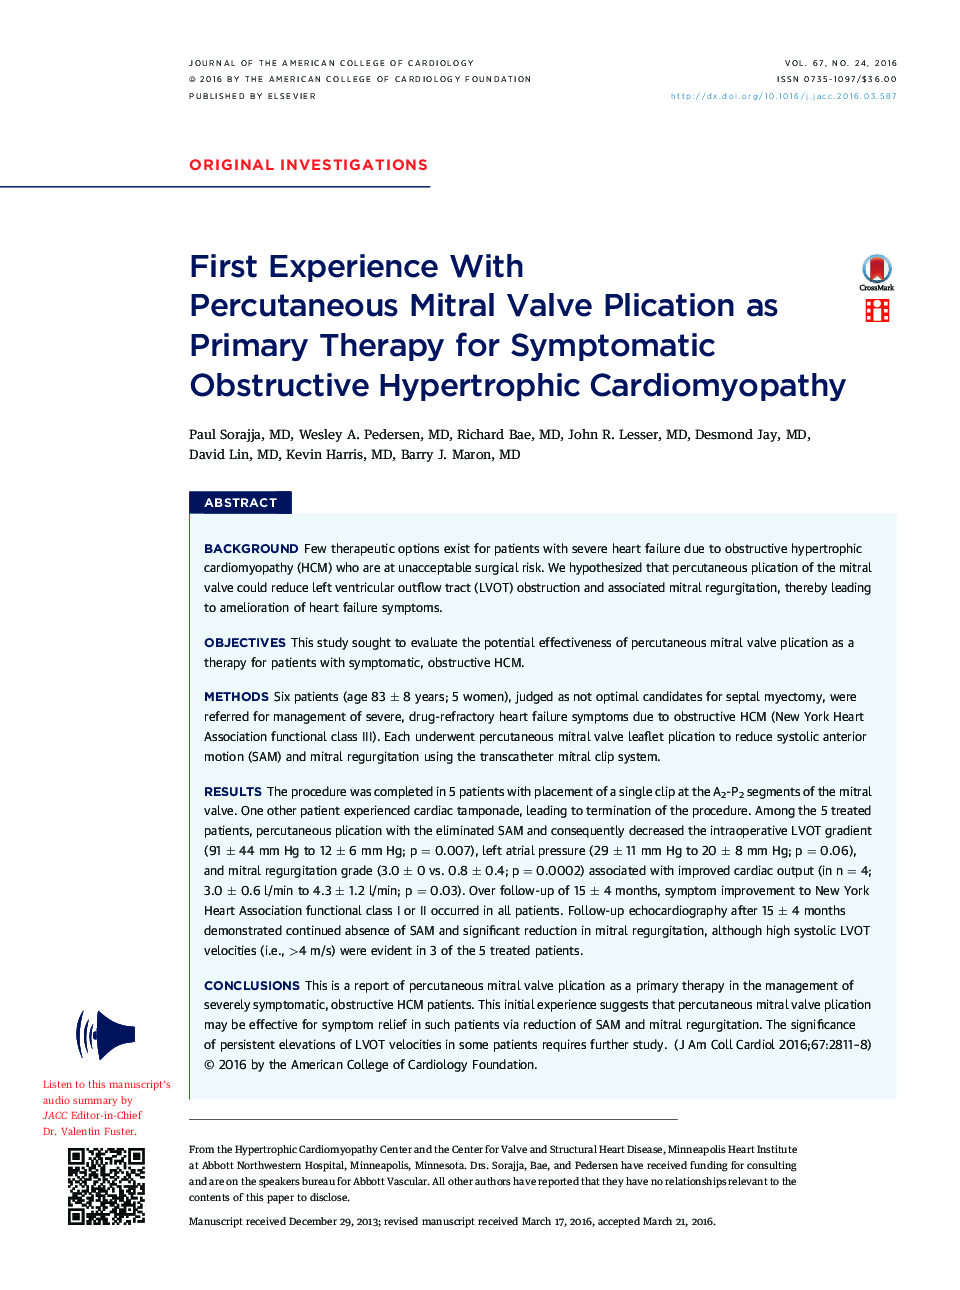 First Experience With Percutaneous Mitral Valve Plication as Primary Therapy for Symptomatic Obstructive Hypertrophic Cardiomyopathy 